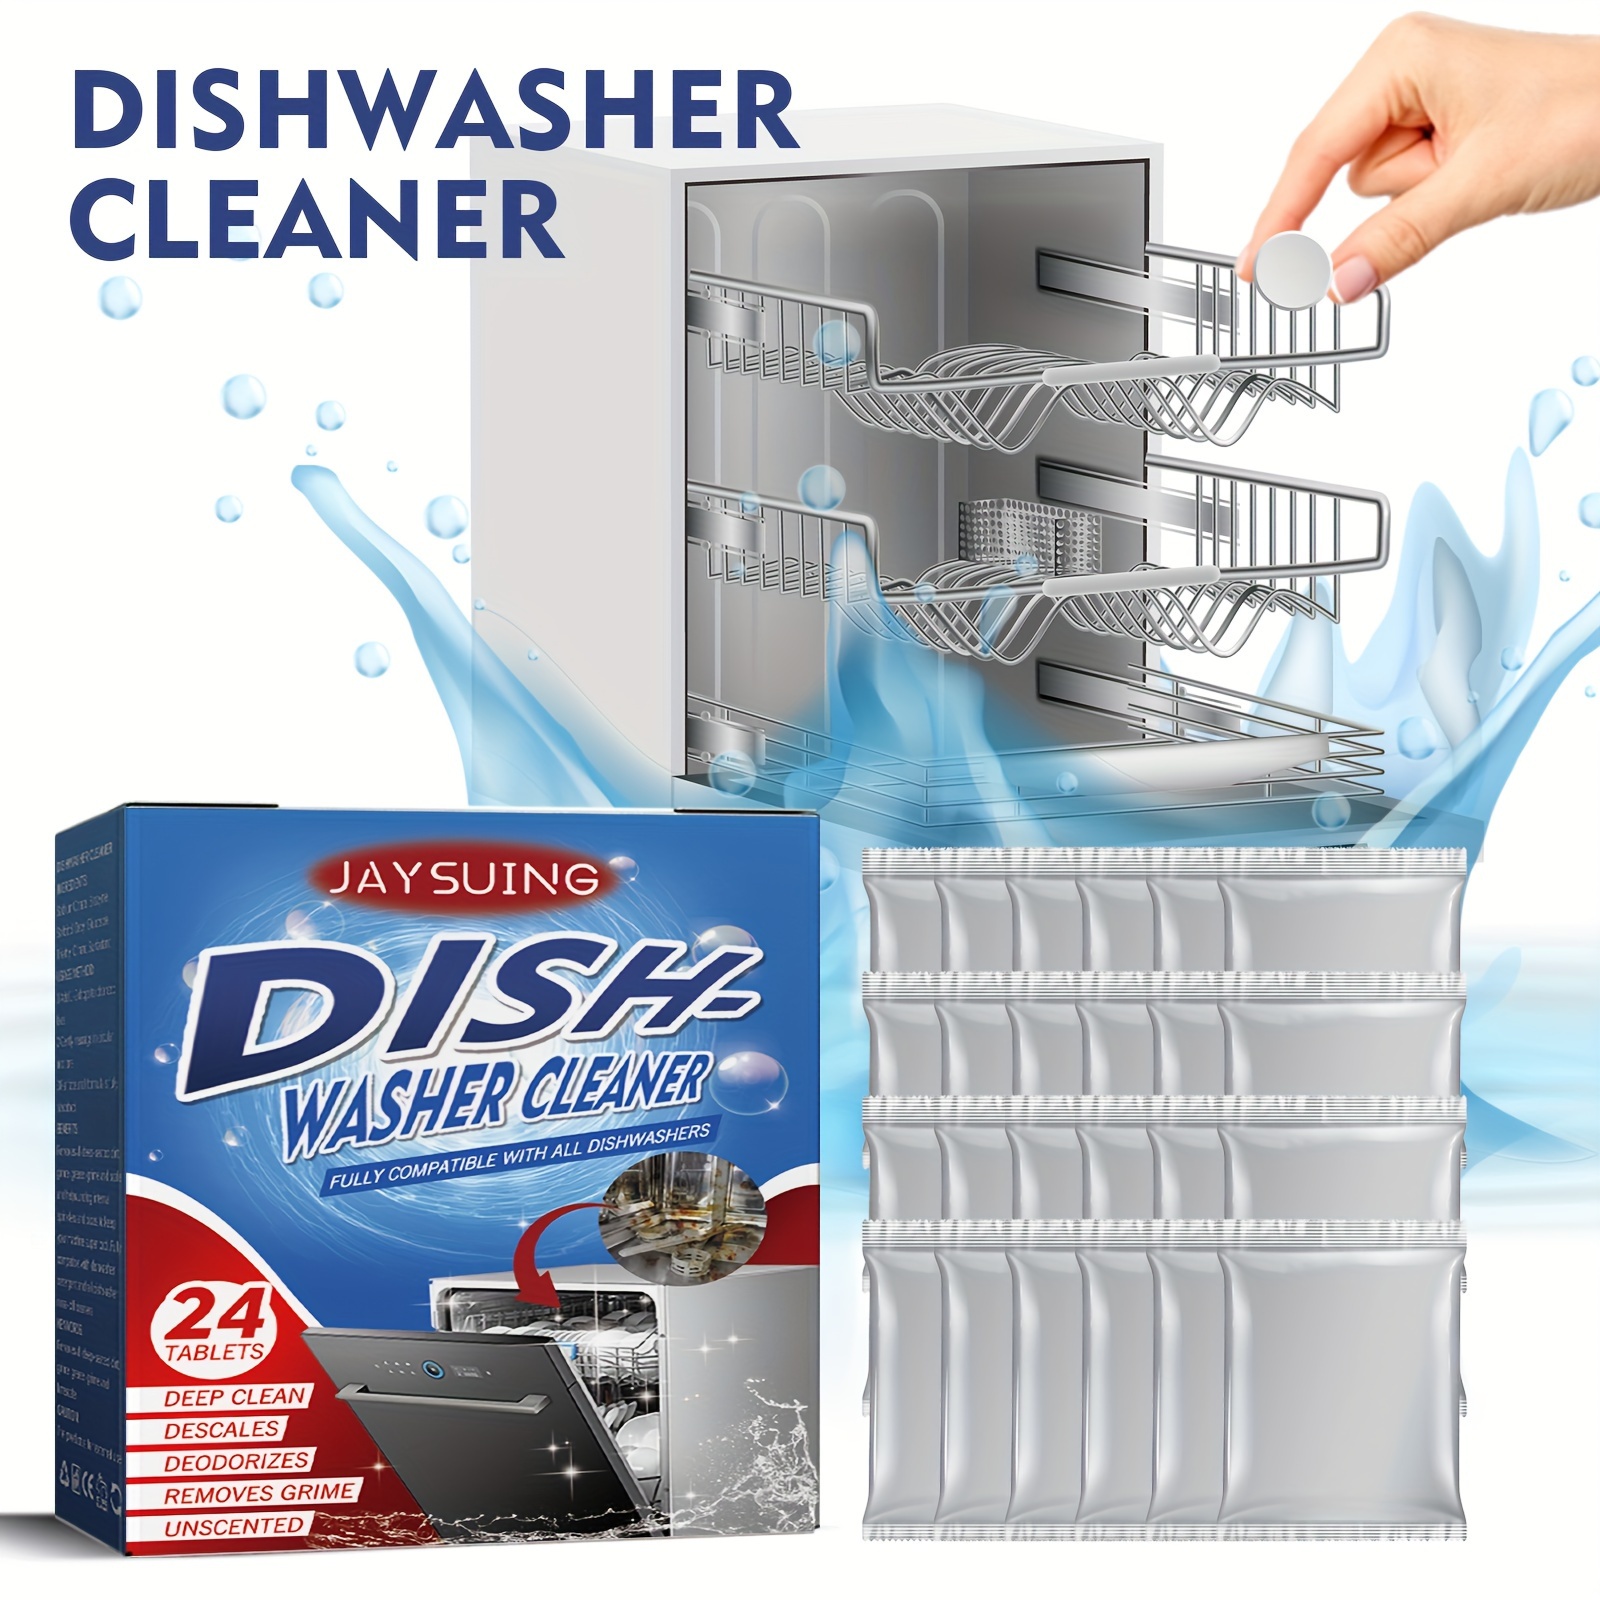 

Effervescent Tablets For Dishwashers Can Make Tableware Sparkle! Safe And Effective, Kitchen Range Hoods To Remove Heavy Oil Stains And Scale, A Must-have Gadget For The Family